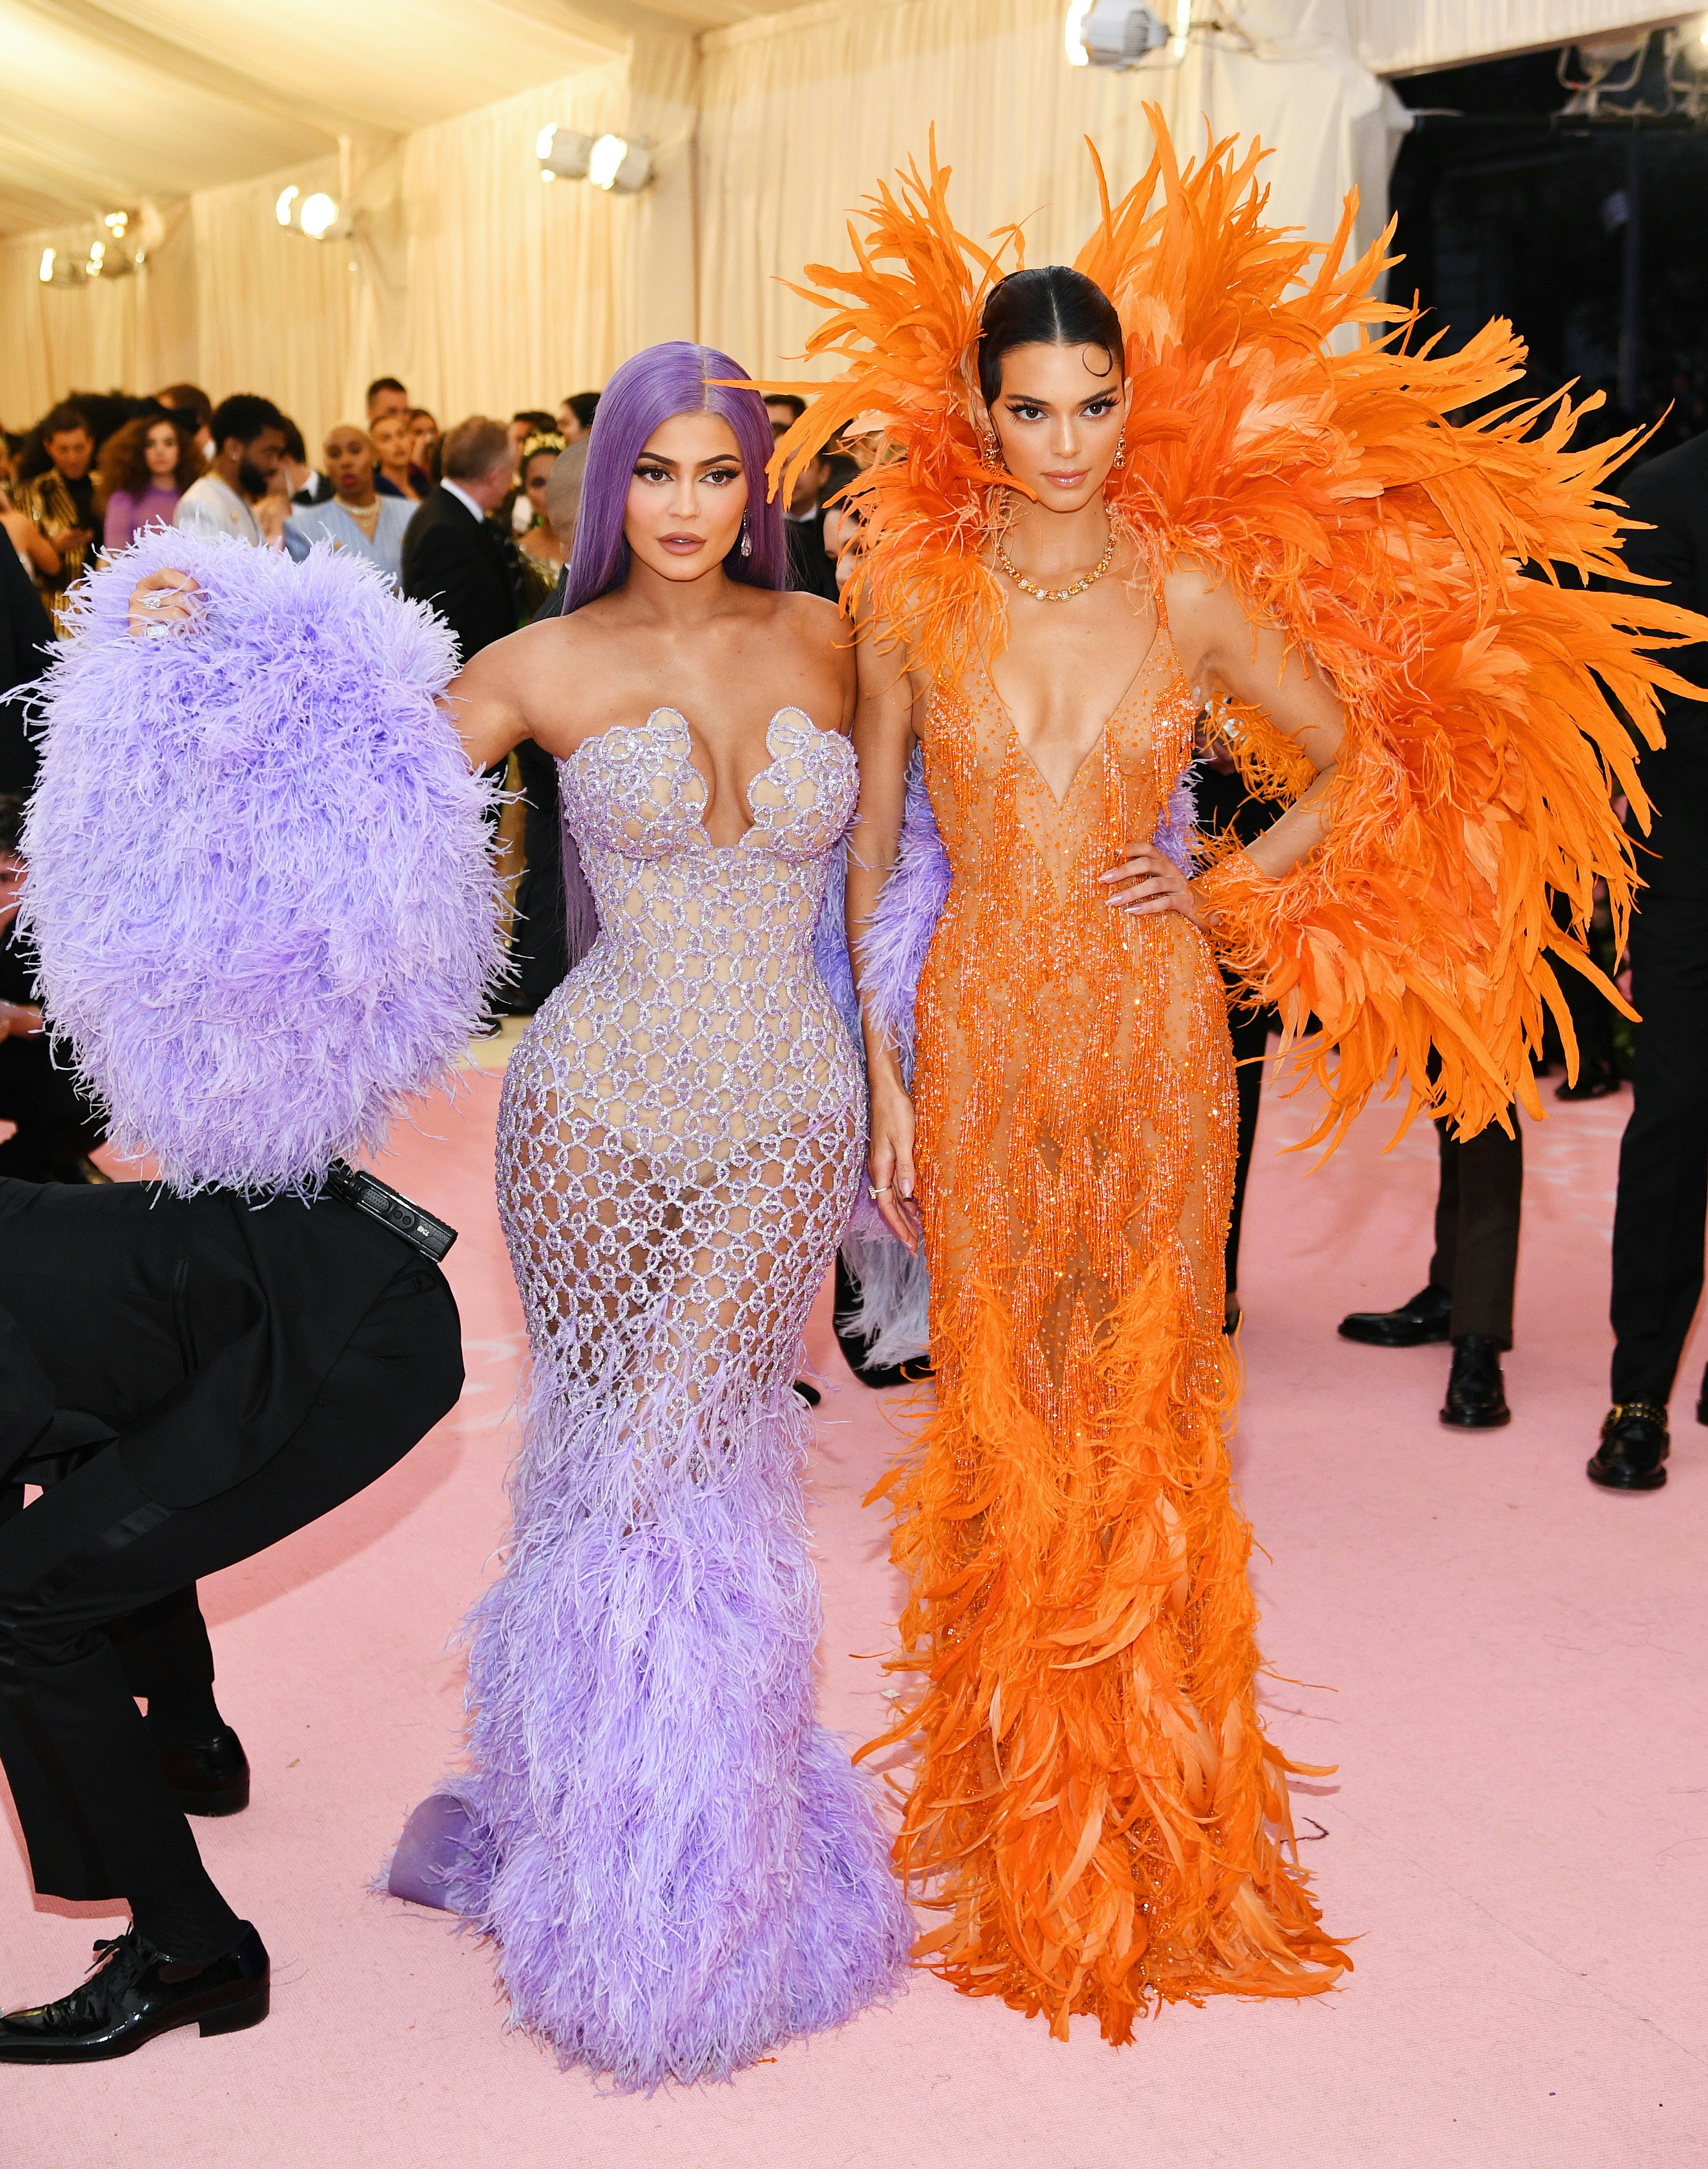 Kendall And Kylie Met Gala Halloween Costume - These DIY Kendall & Kylie Jenner 2019 Met Gala Halloween Costumes Are